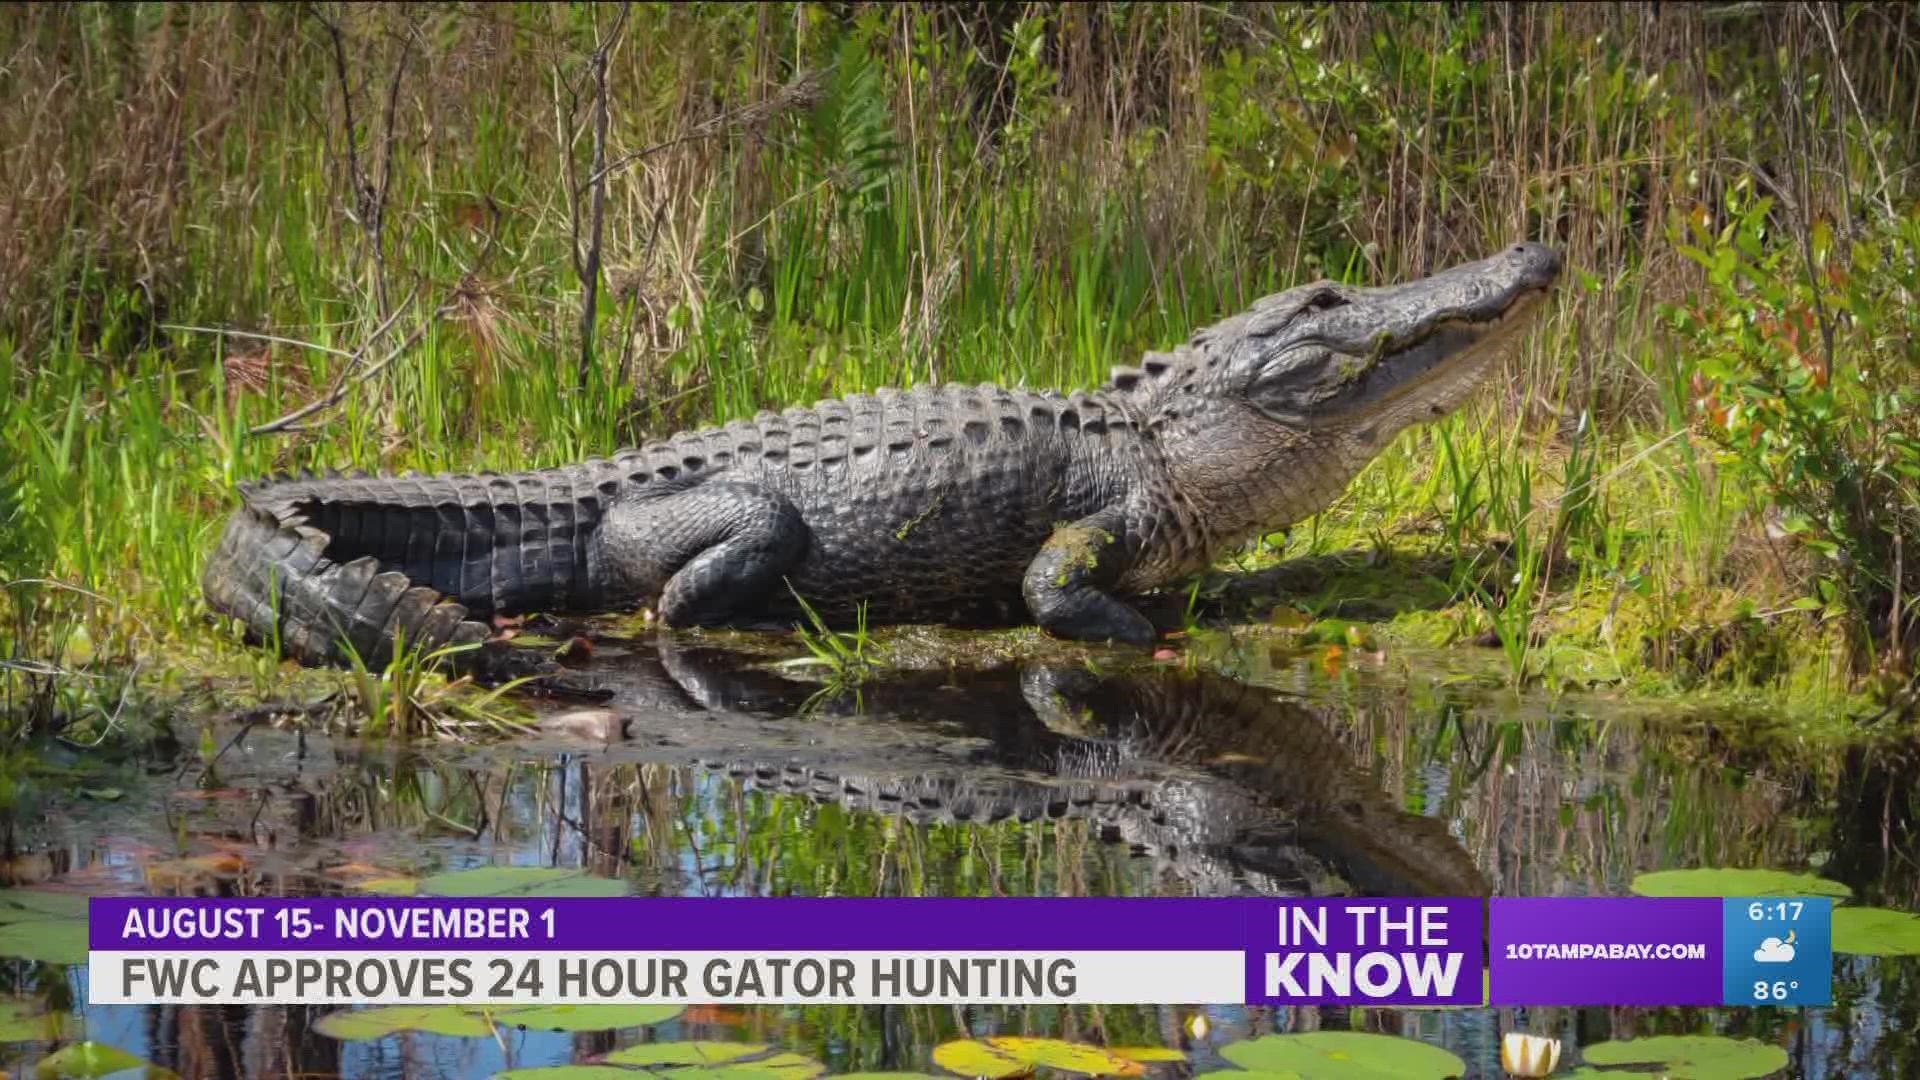 Permitted hunters will now have a longer time and new ways to capture an alligator.